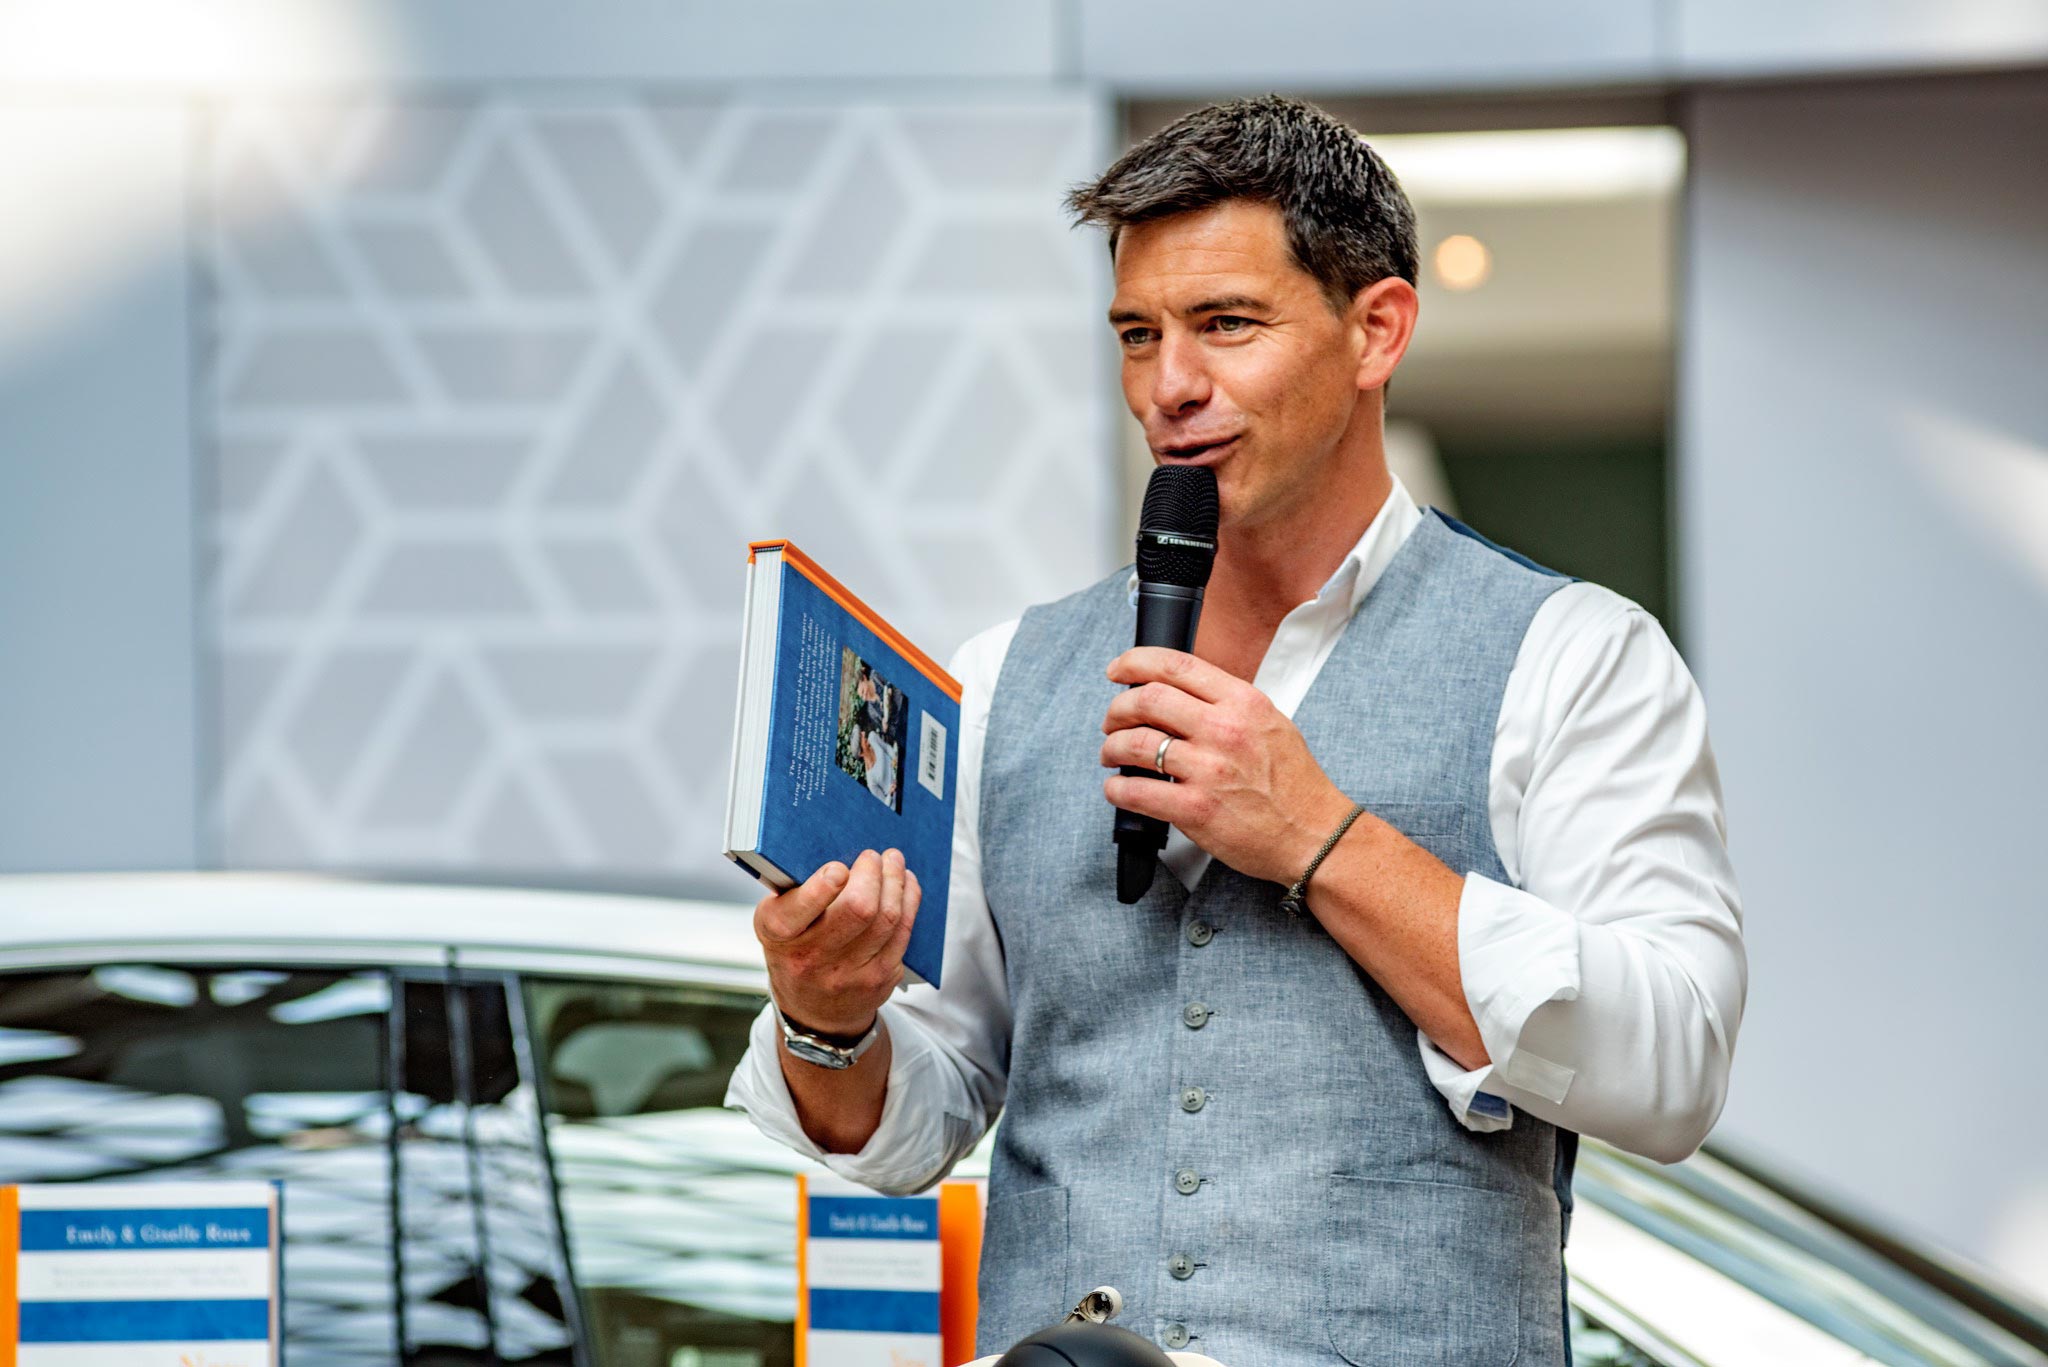 An engaging shot by Wright Content, featuring Marcus Bean, a TV presenter chef, at a Lexus experiential event. In this image, Marcus holds a microphone in one hand and a book in the other, smiling warmly as he interacts with the audience. Wright Content excels in capturing authentic moments like this.